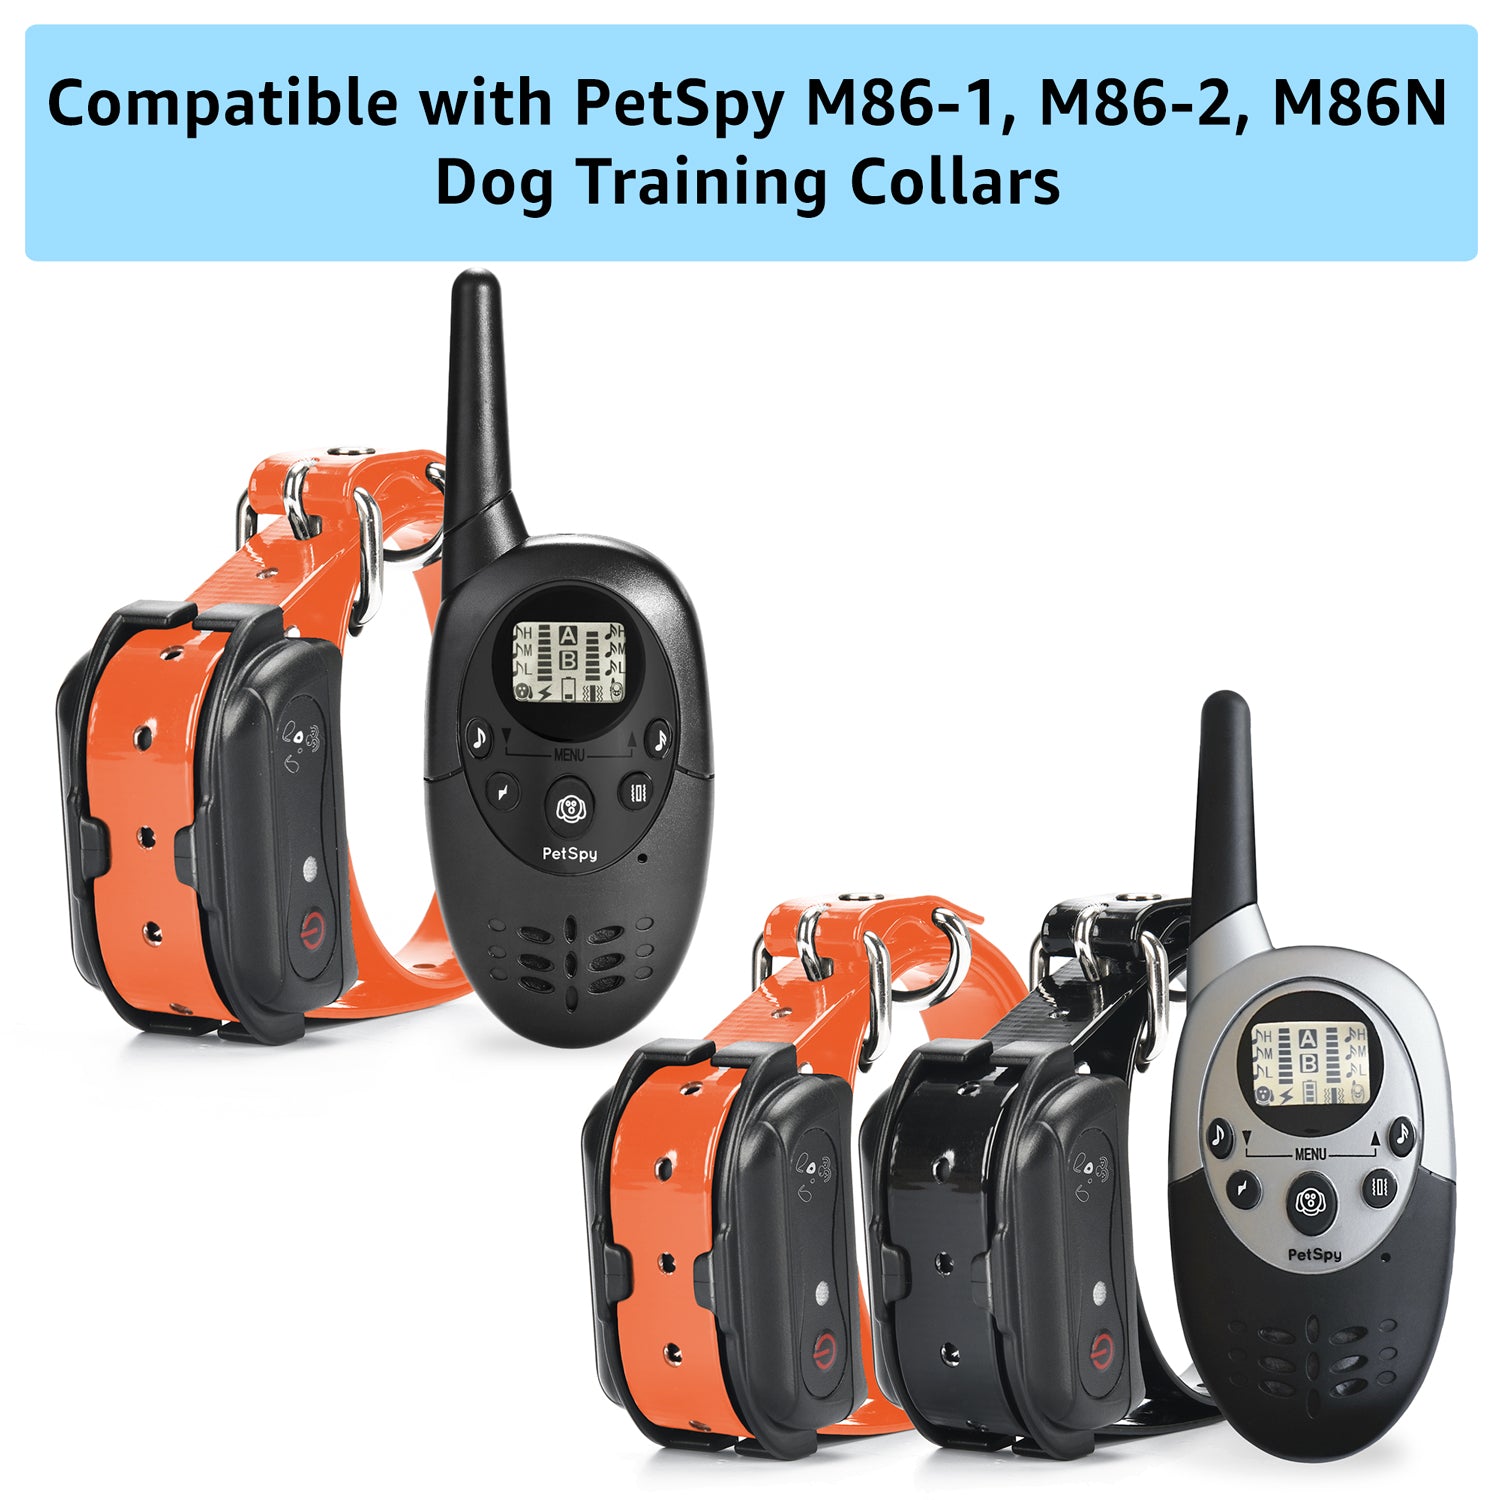 replacement remote compatible with M86-1, M86-2, M86N Dog training collars